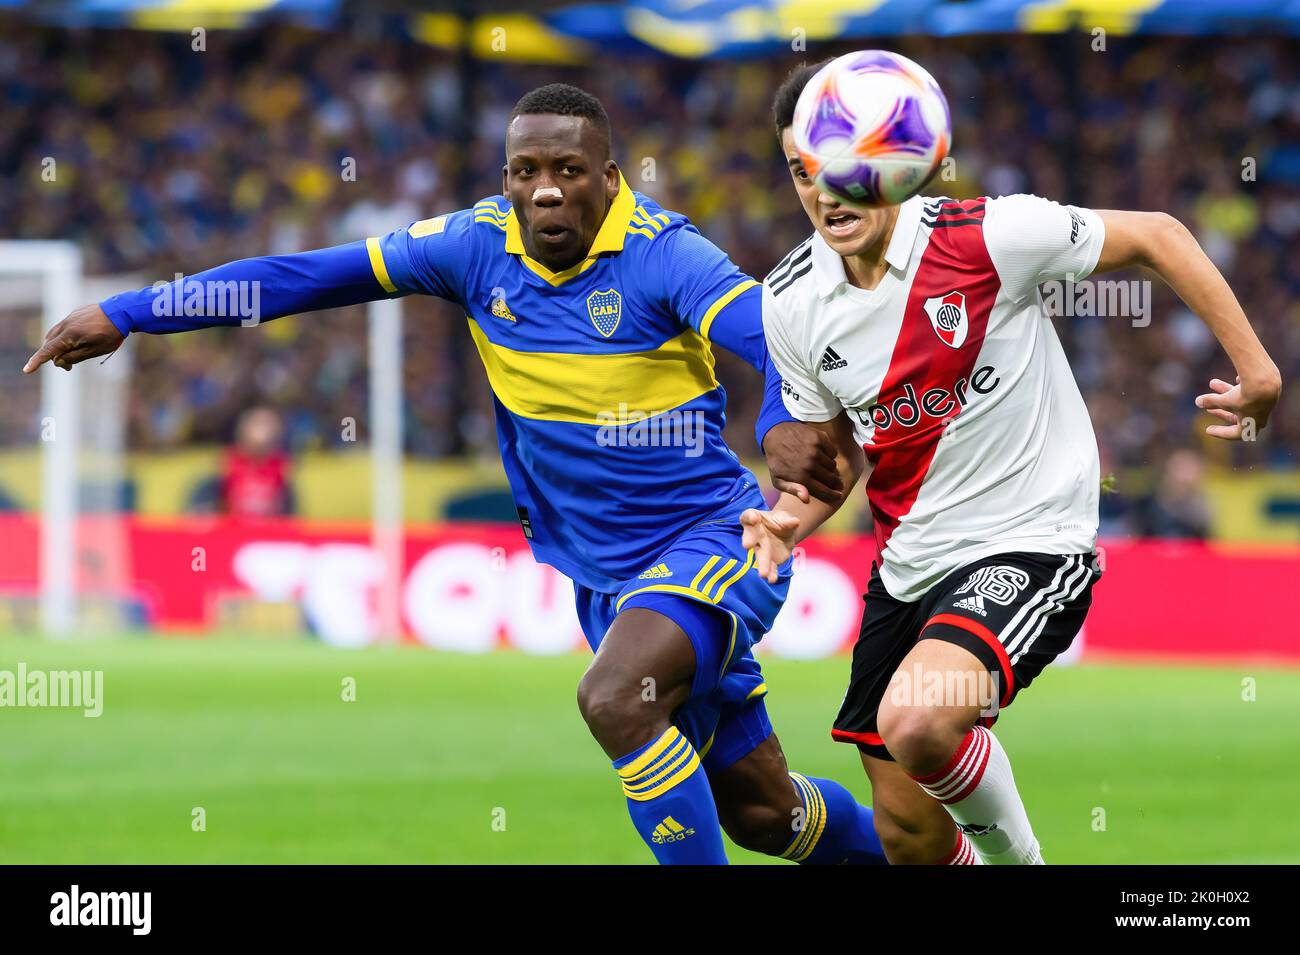 Buenos Aires, Argentina. 11th Sep, 2022. Pablo Solari (R) of River Plate and Luis Advincula (L) of Boca Juniors seen in action during a match between Boca Juniors and River Plate as part of Liga Profesional 2022 at Estadio Alberto J. Armando.(Final score; Boca Juniors 1:0 River Plate) (Photo by Manuel Cortina/SOPA Images/Sipa USA) Credit: Sipa USA/Alamy Live News Stock Photo